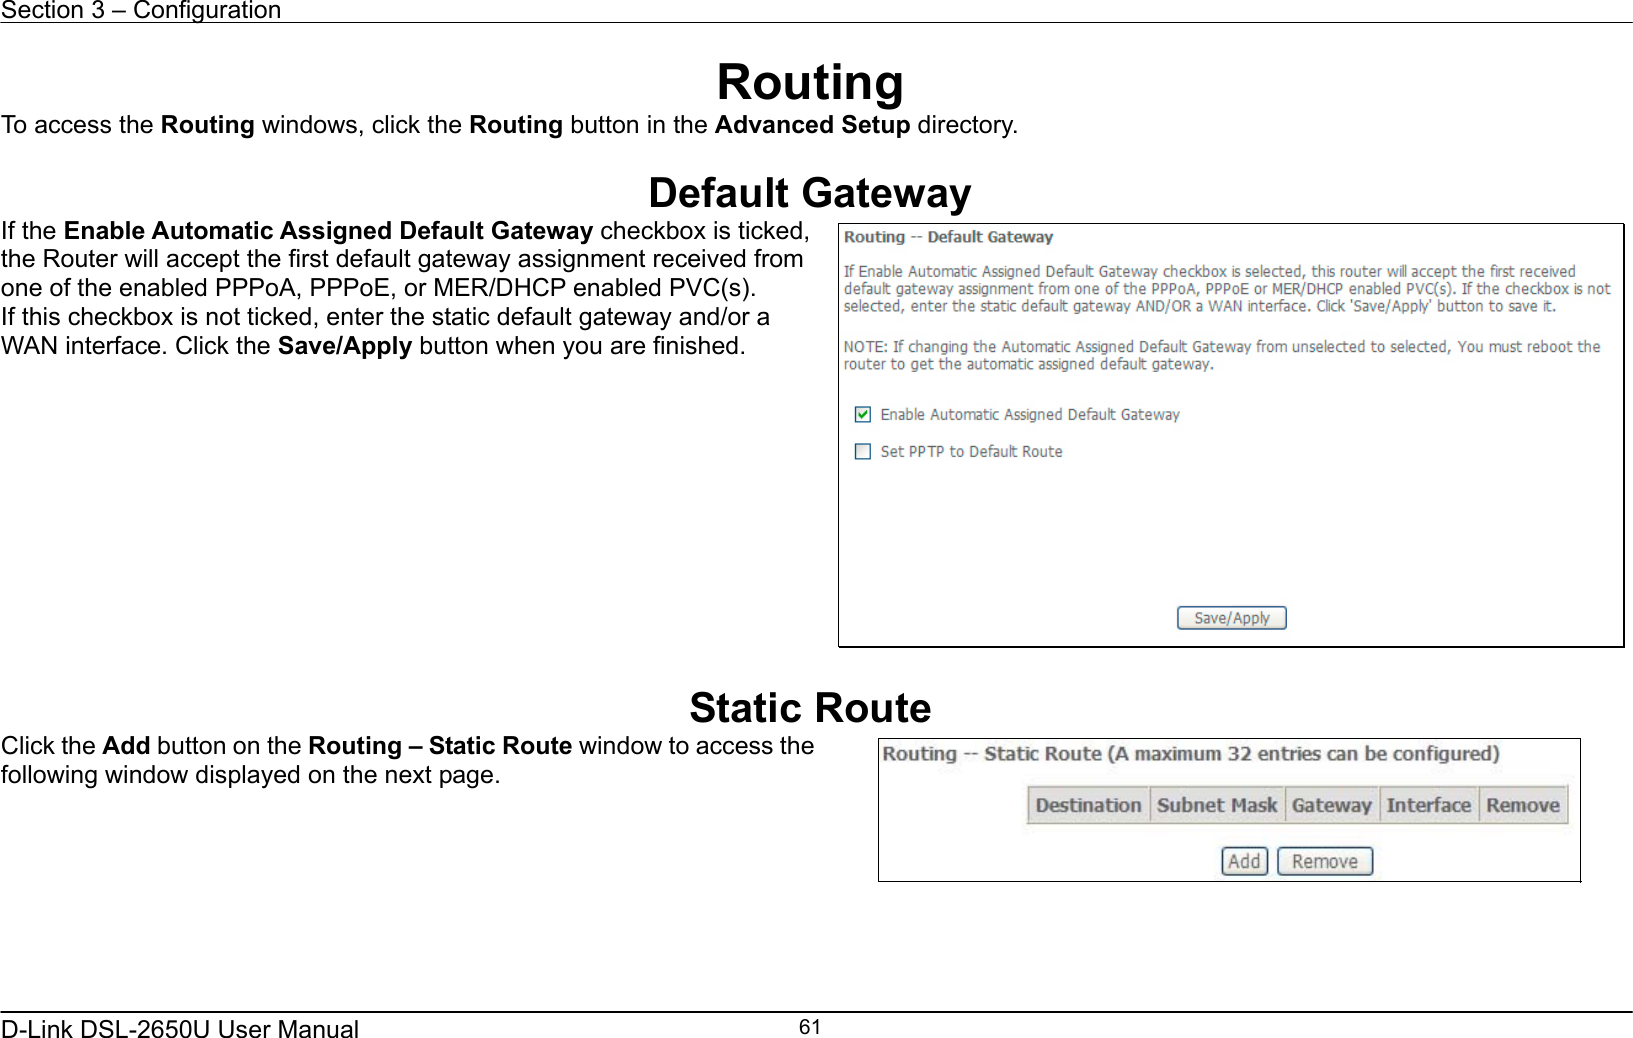 Section 3 – Configuration   D-Link DSL-2650U User Manual    61Routing To access the Routing windows, click the Routing button in the Advanced Setup directory.  Default Gateway If the Enable Automatic Assigned Default Gateway checkbox is ticked, the Router will accept the first default gateway assignment received from one of the enabled PPPoA, PPPoE, or MER/DHCP enabled PVC(s). If this checkbox is not ticked, enter the static default gateway and/or a WAN interface. Click the Save/Apply button when you are finished.     Static Route Click the Add button on the Routing – Static Route window to access the following window displayed on the next page.     